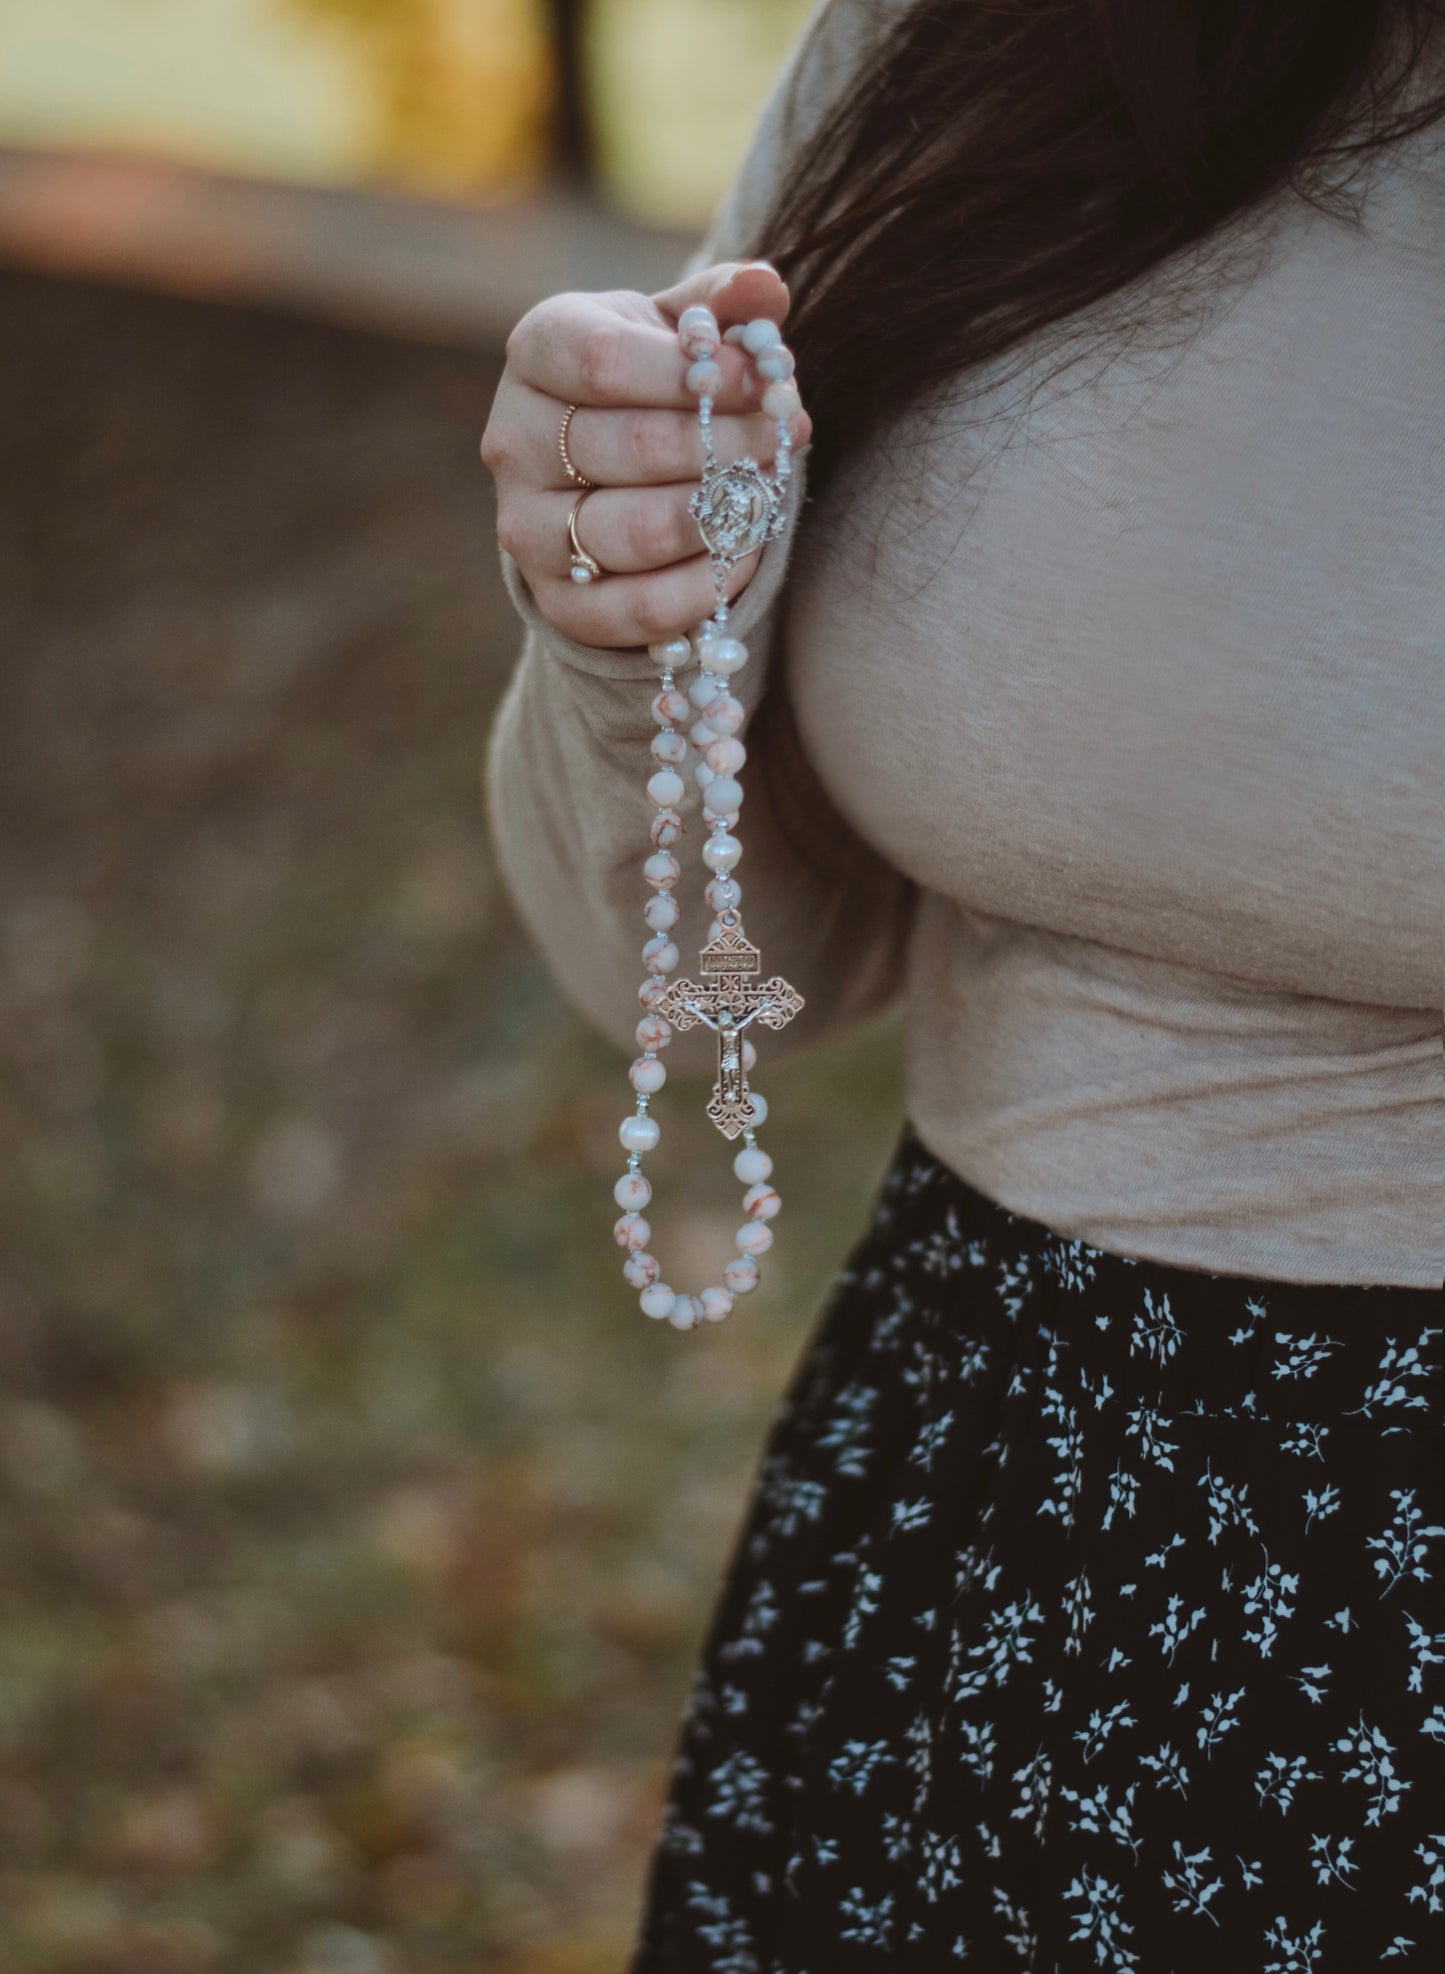 Immaculate Heart of Mary Rosary